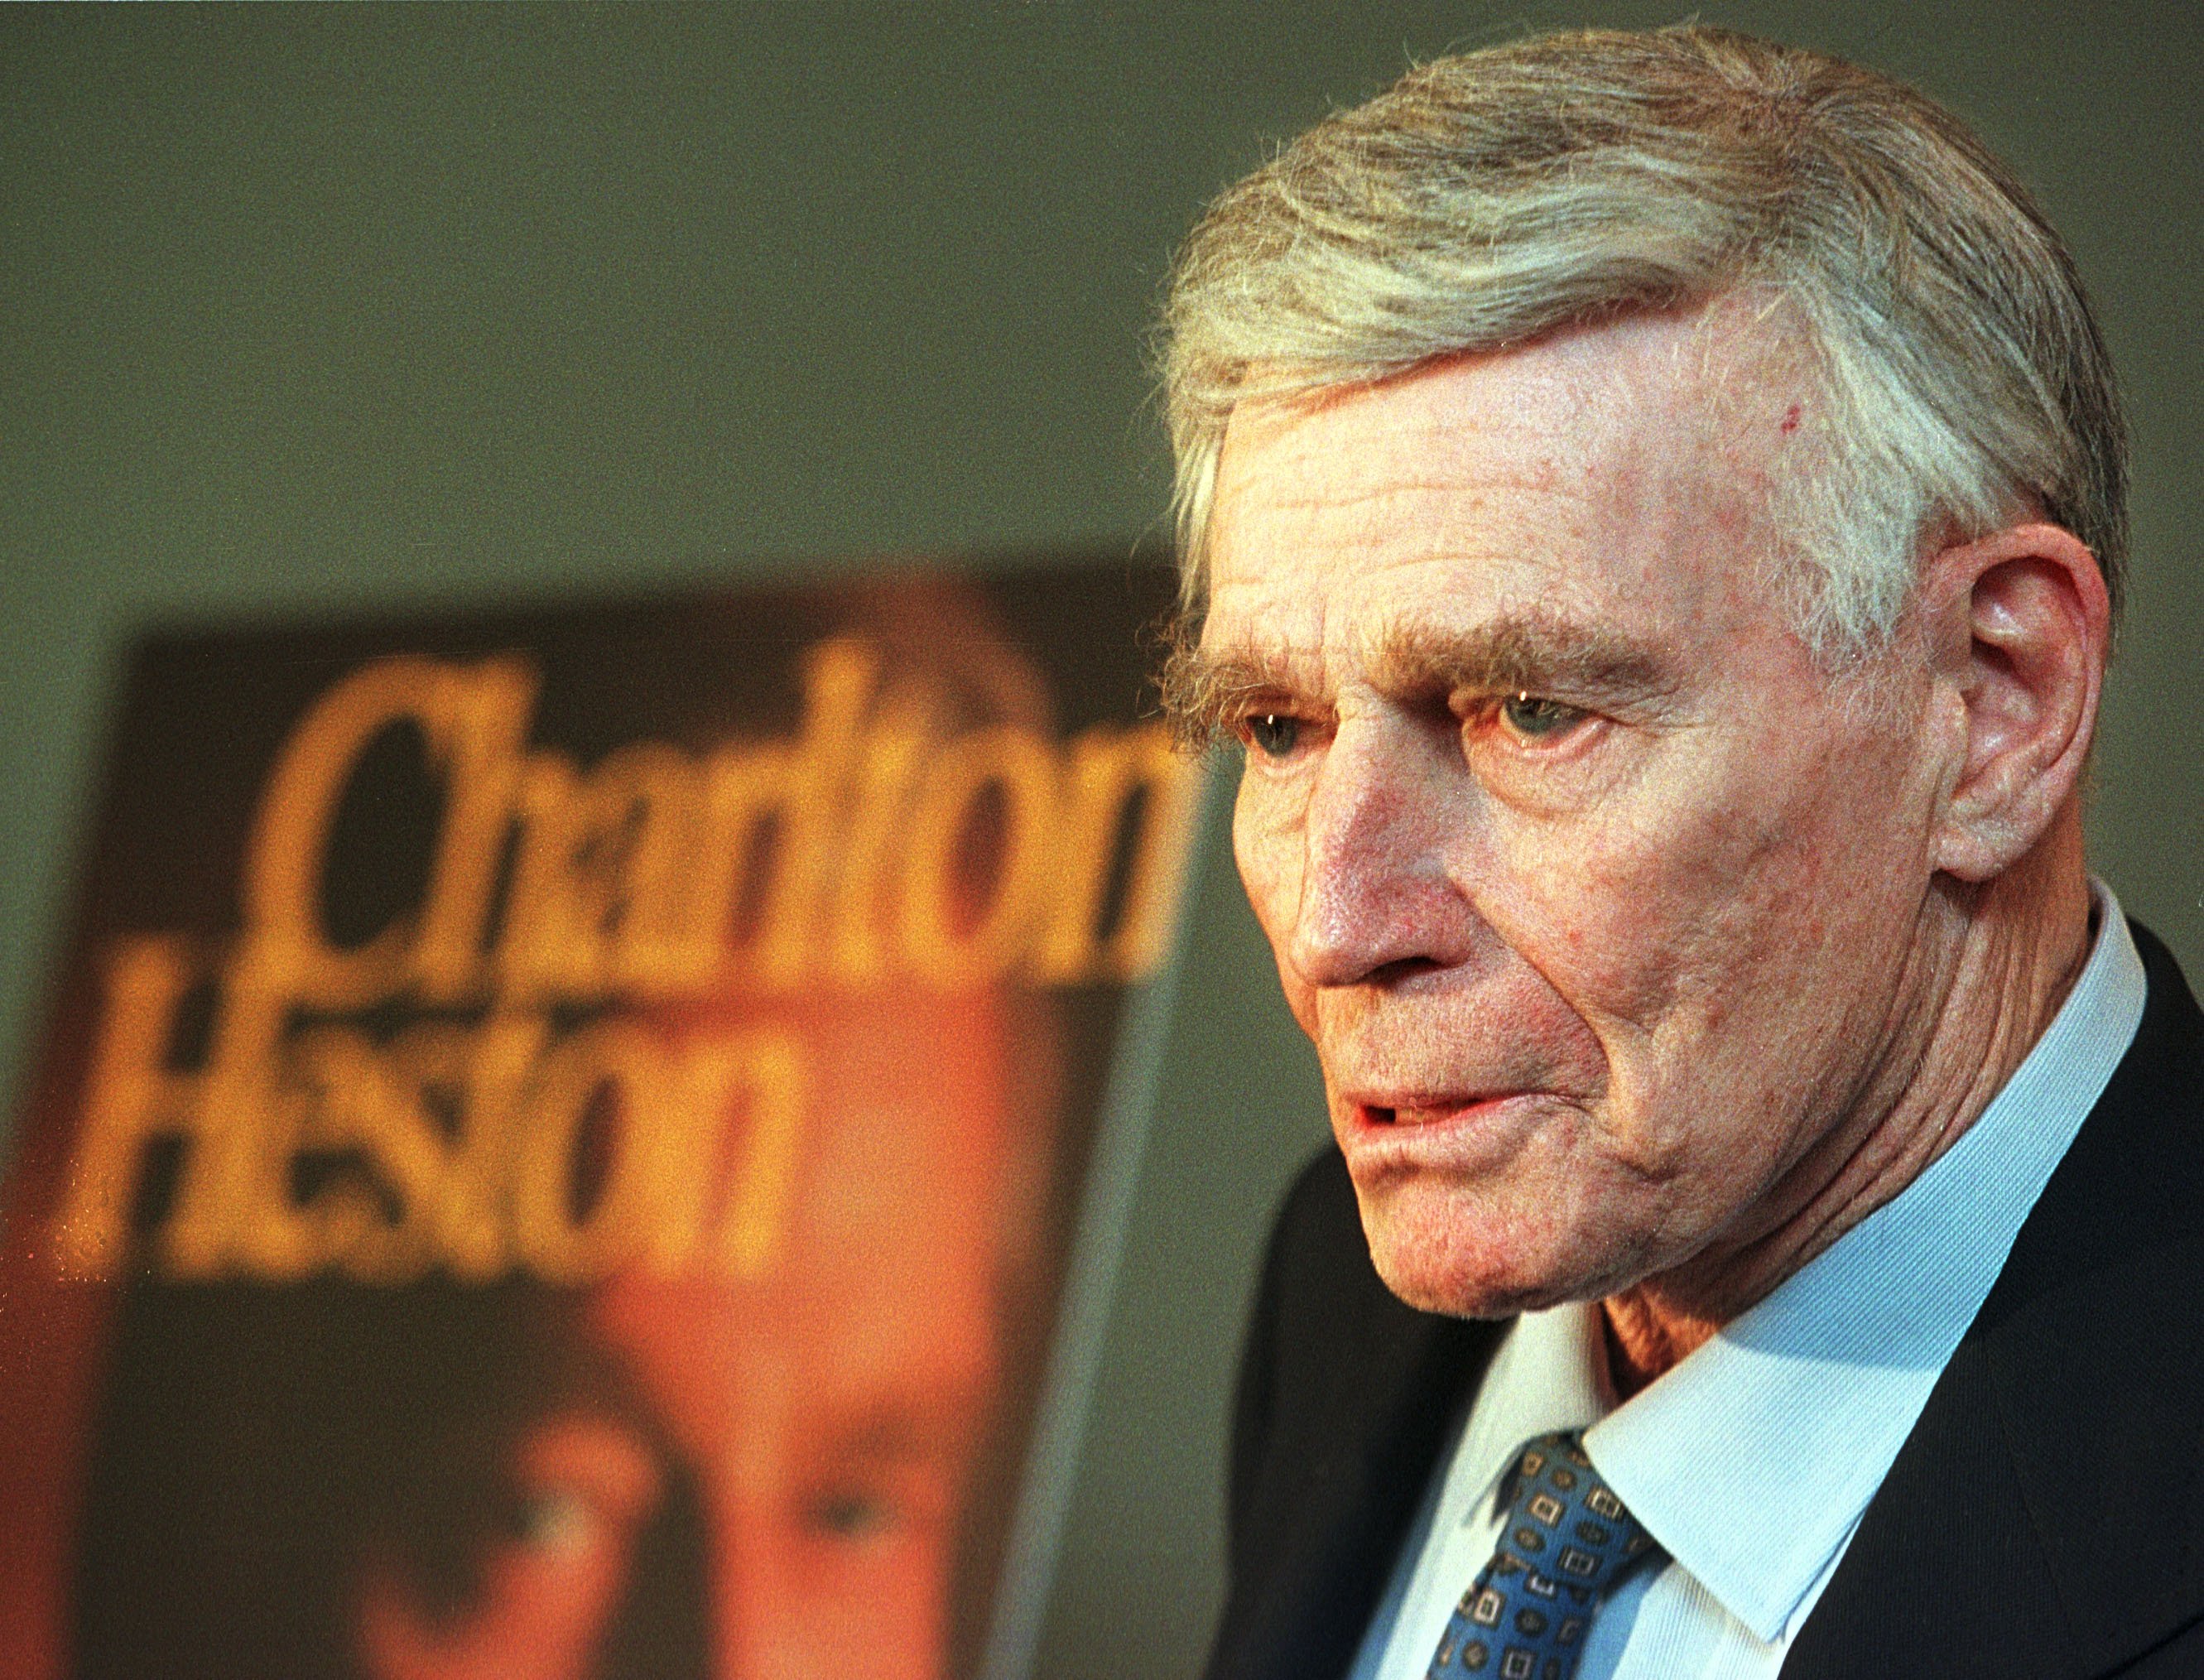 Charlton Heston in a book signing on September 8, 2000 in Washington. | Source: Getty Images